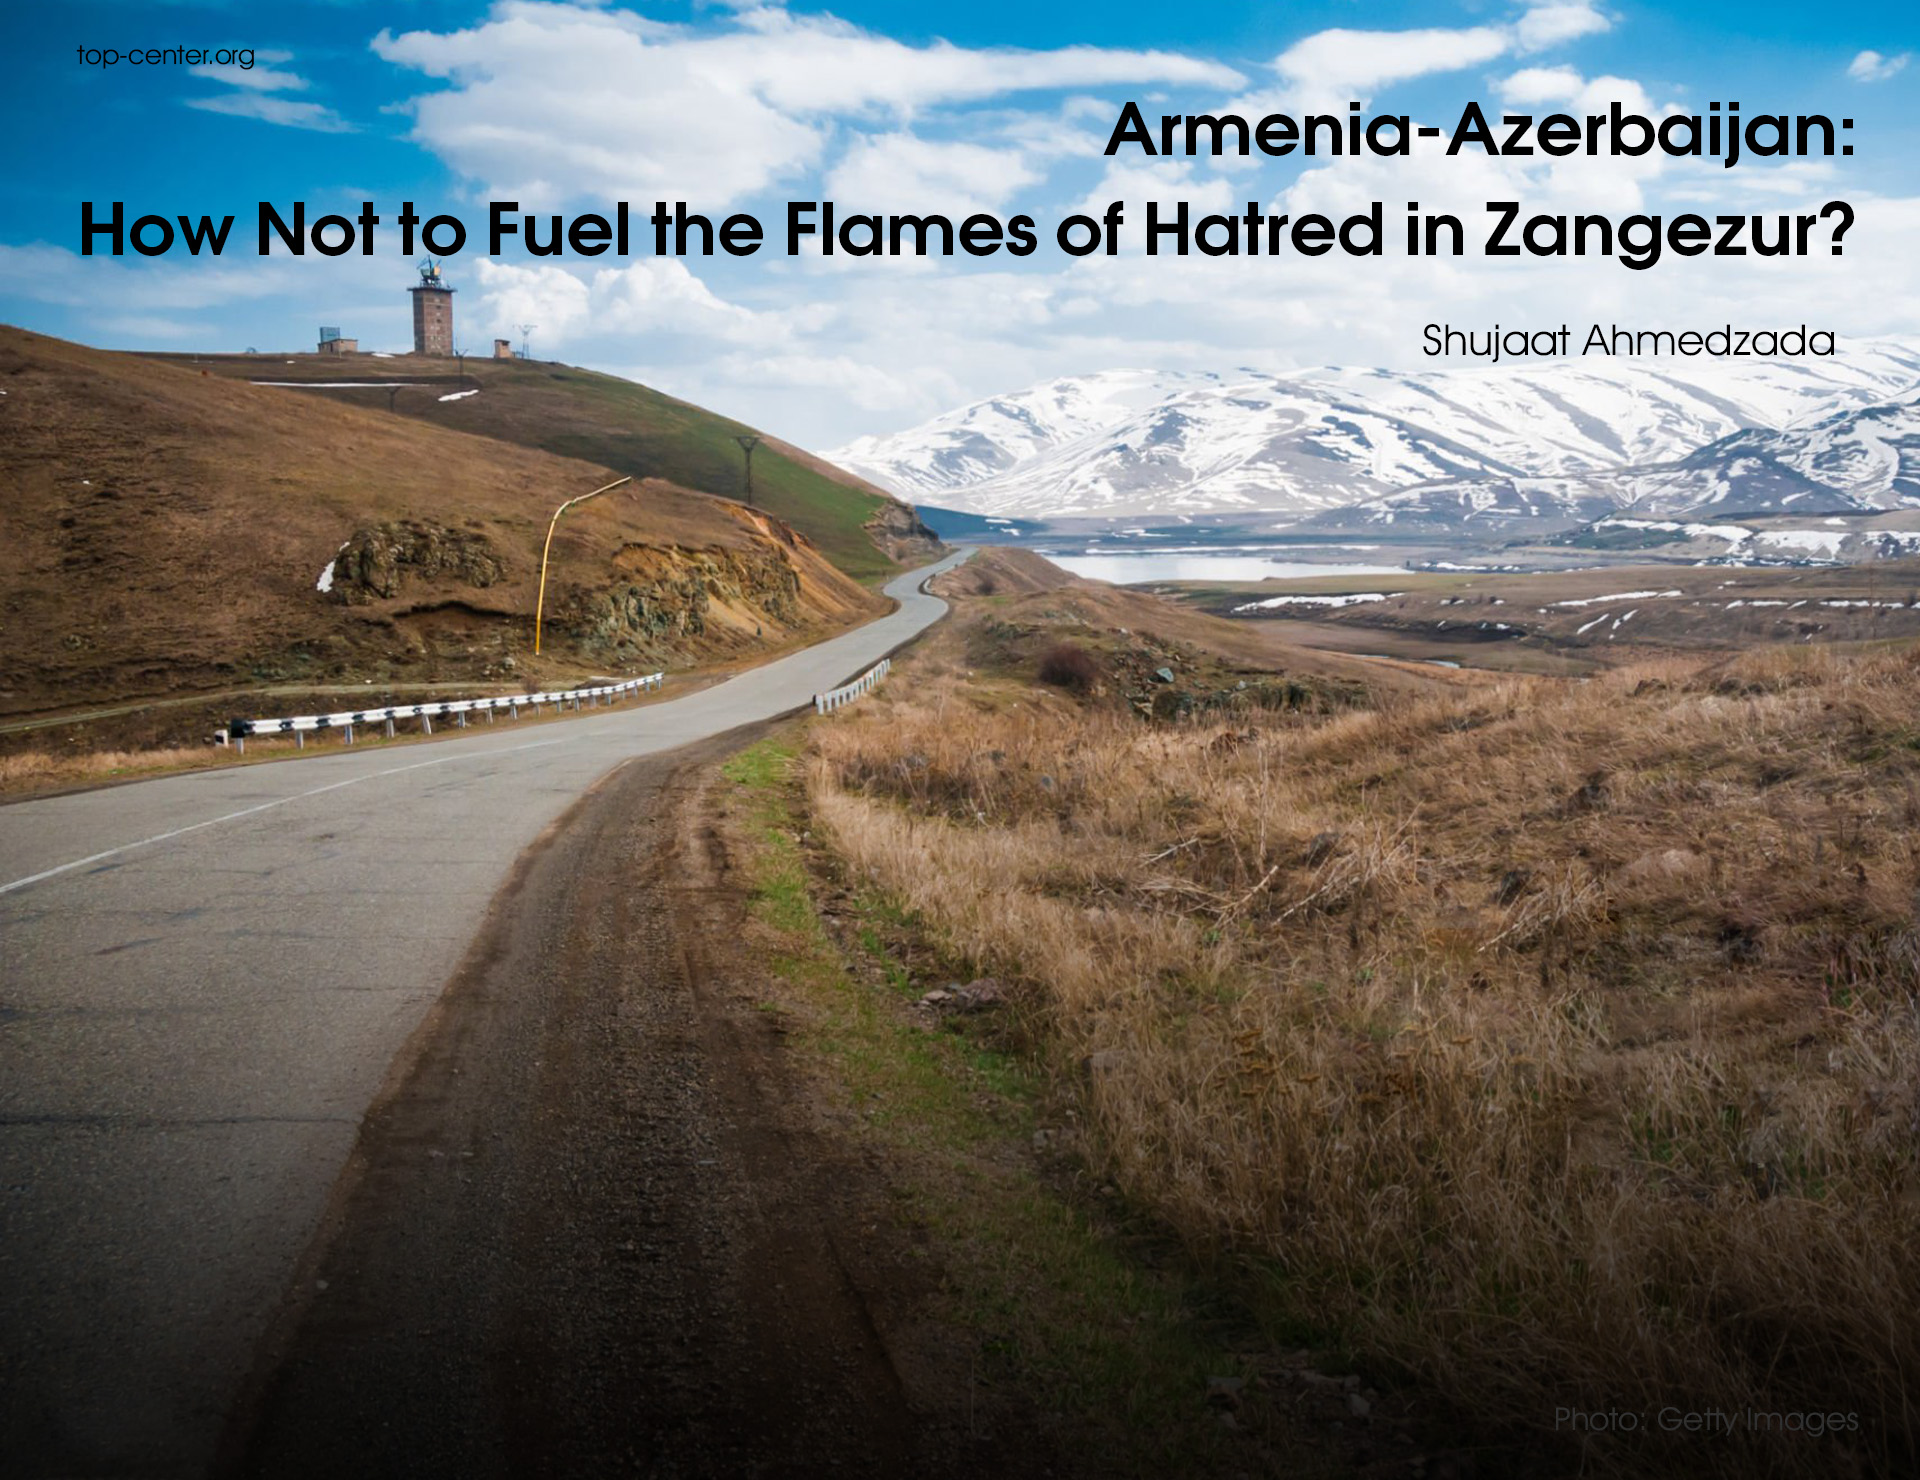 Armenia-Azerbaijan: How Not to Fuel the Flames of Hatred in Zangezur?